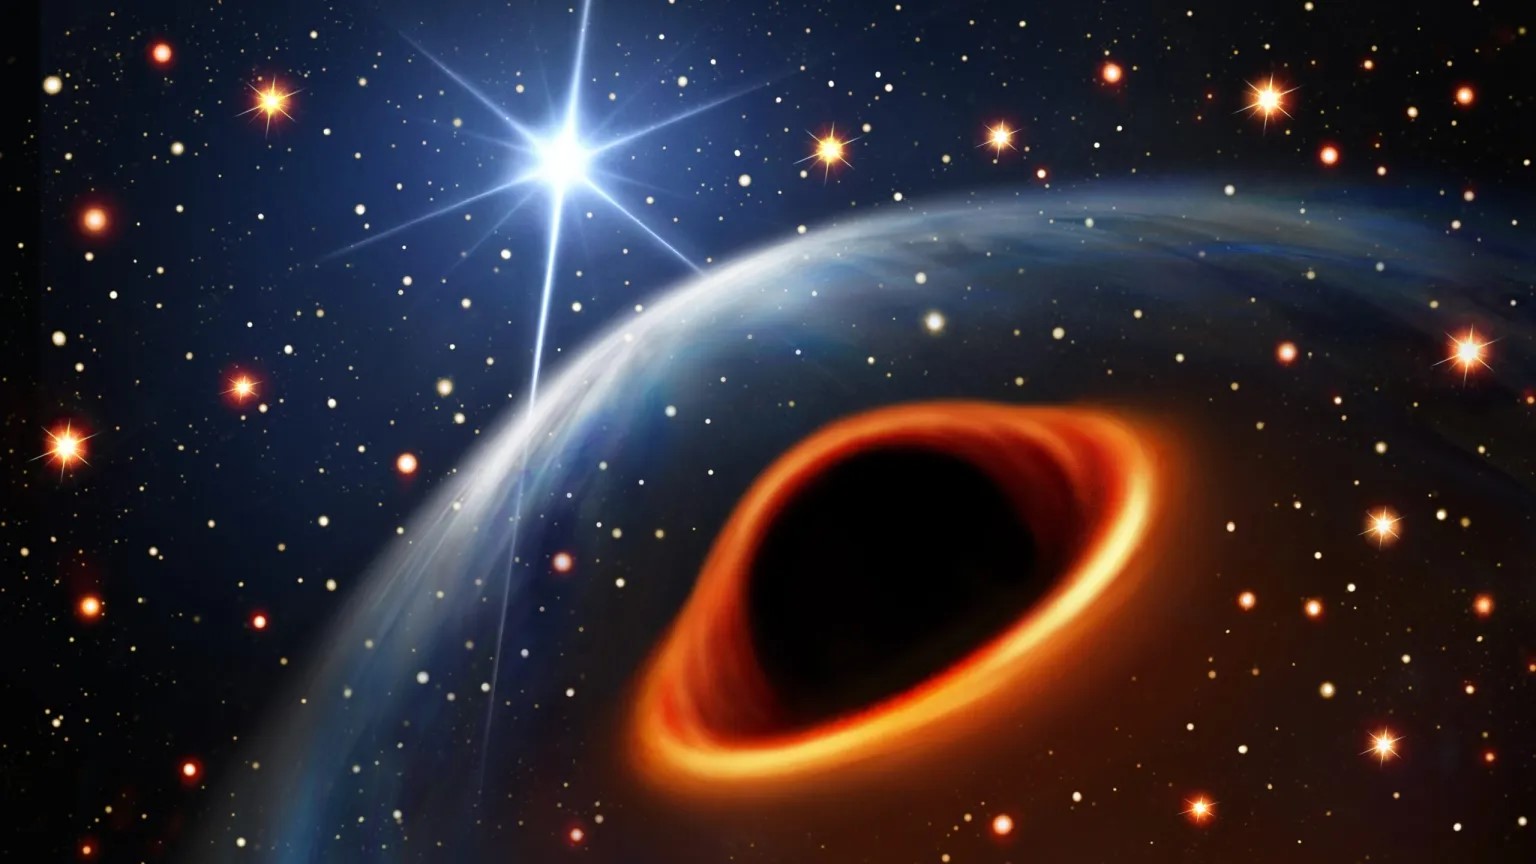 A black hole encircled with an orange ring surrounded by stars. One star is much larger and brighter than the rest.